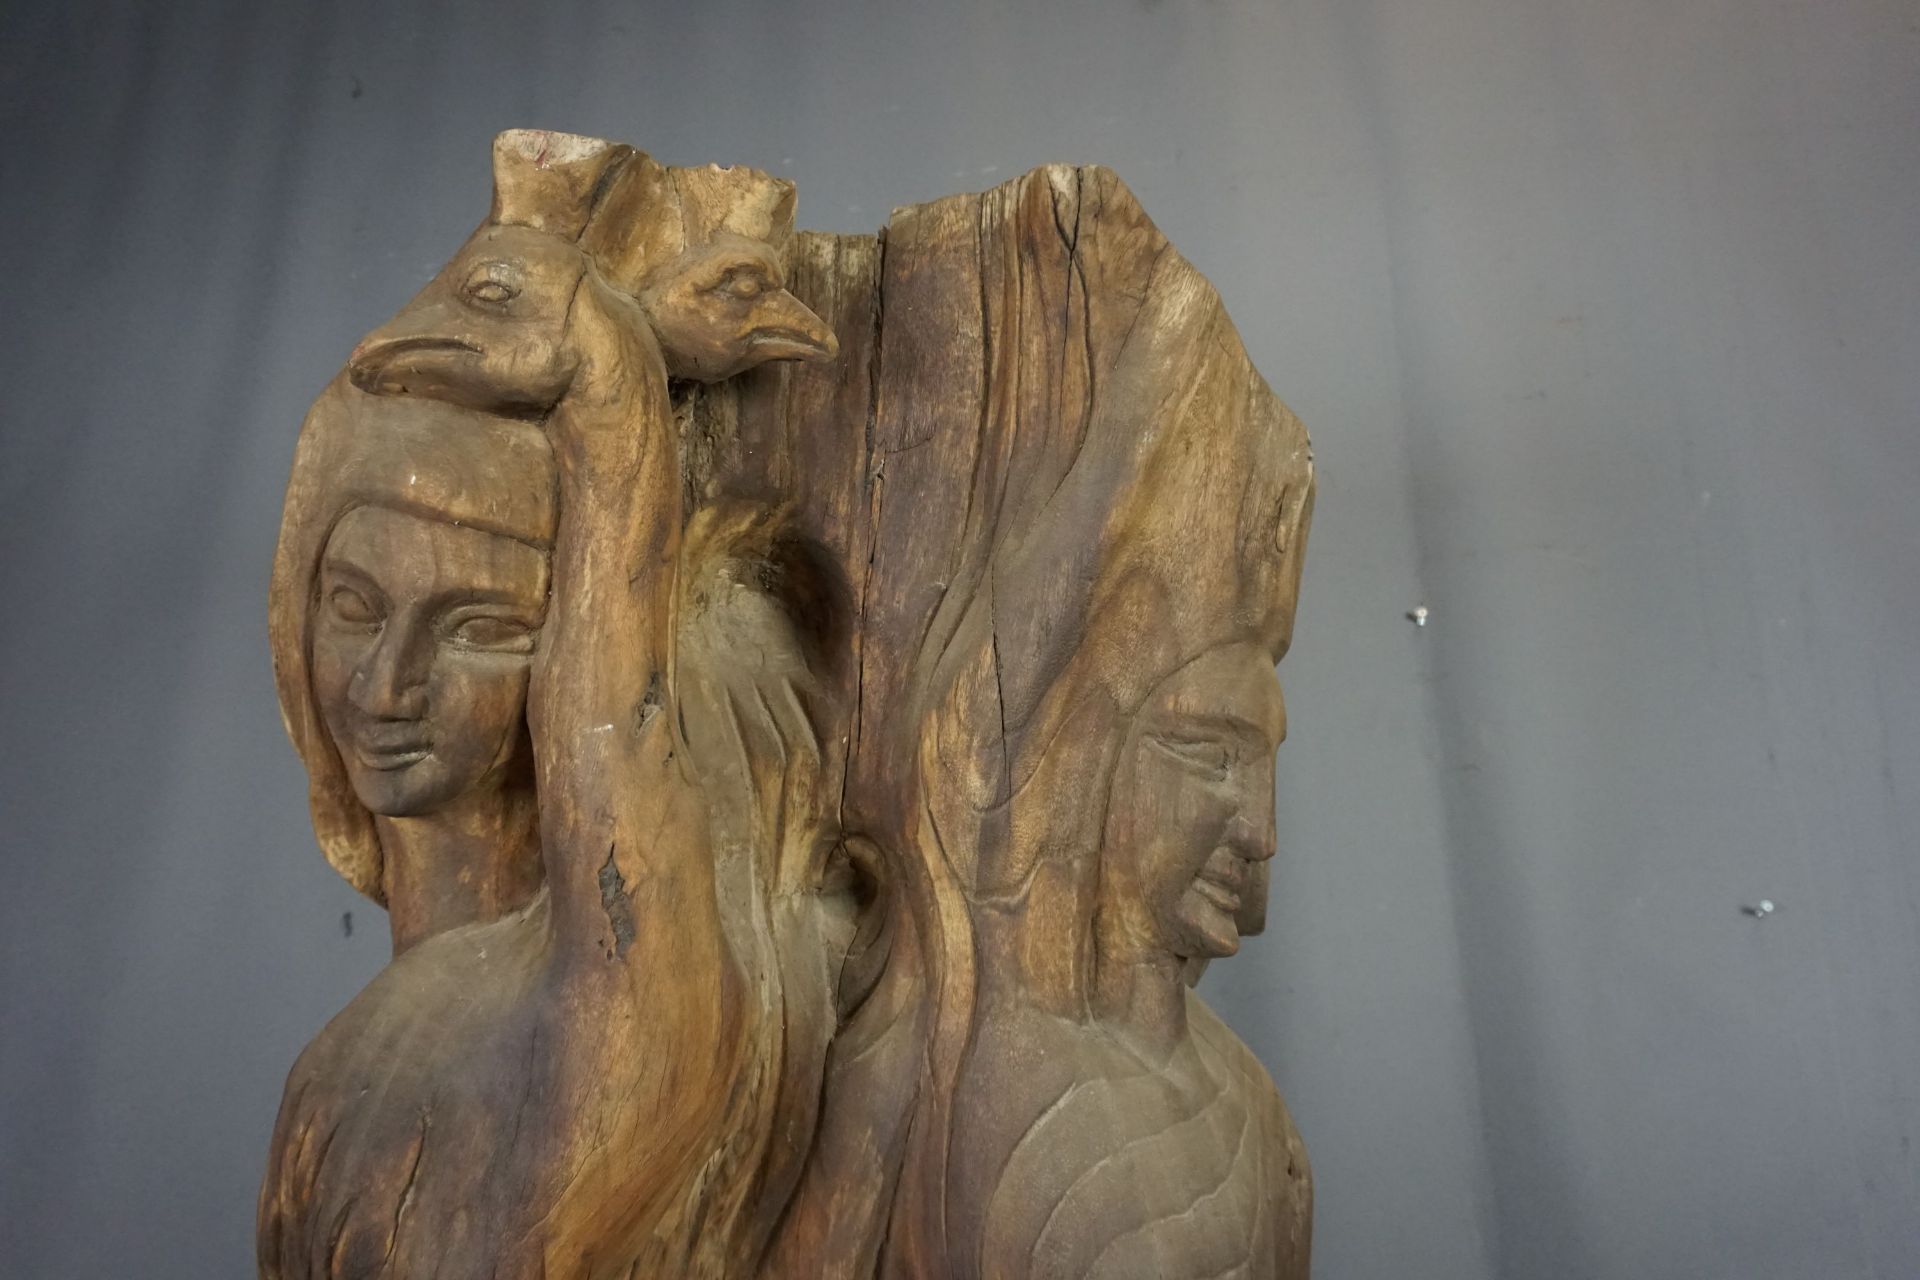 Decorative sculpture in wood with 3 faces - Image 4 of 4